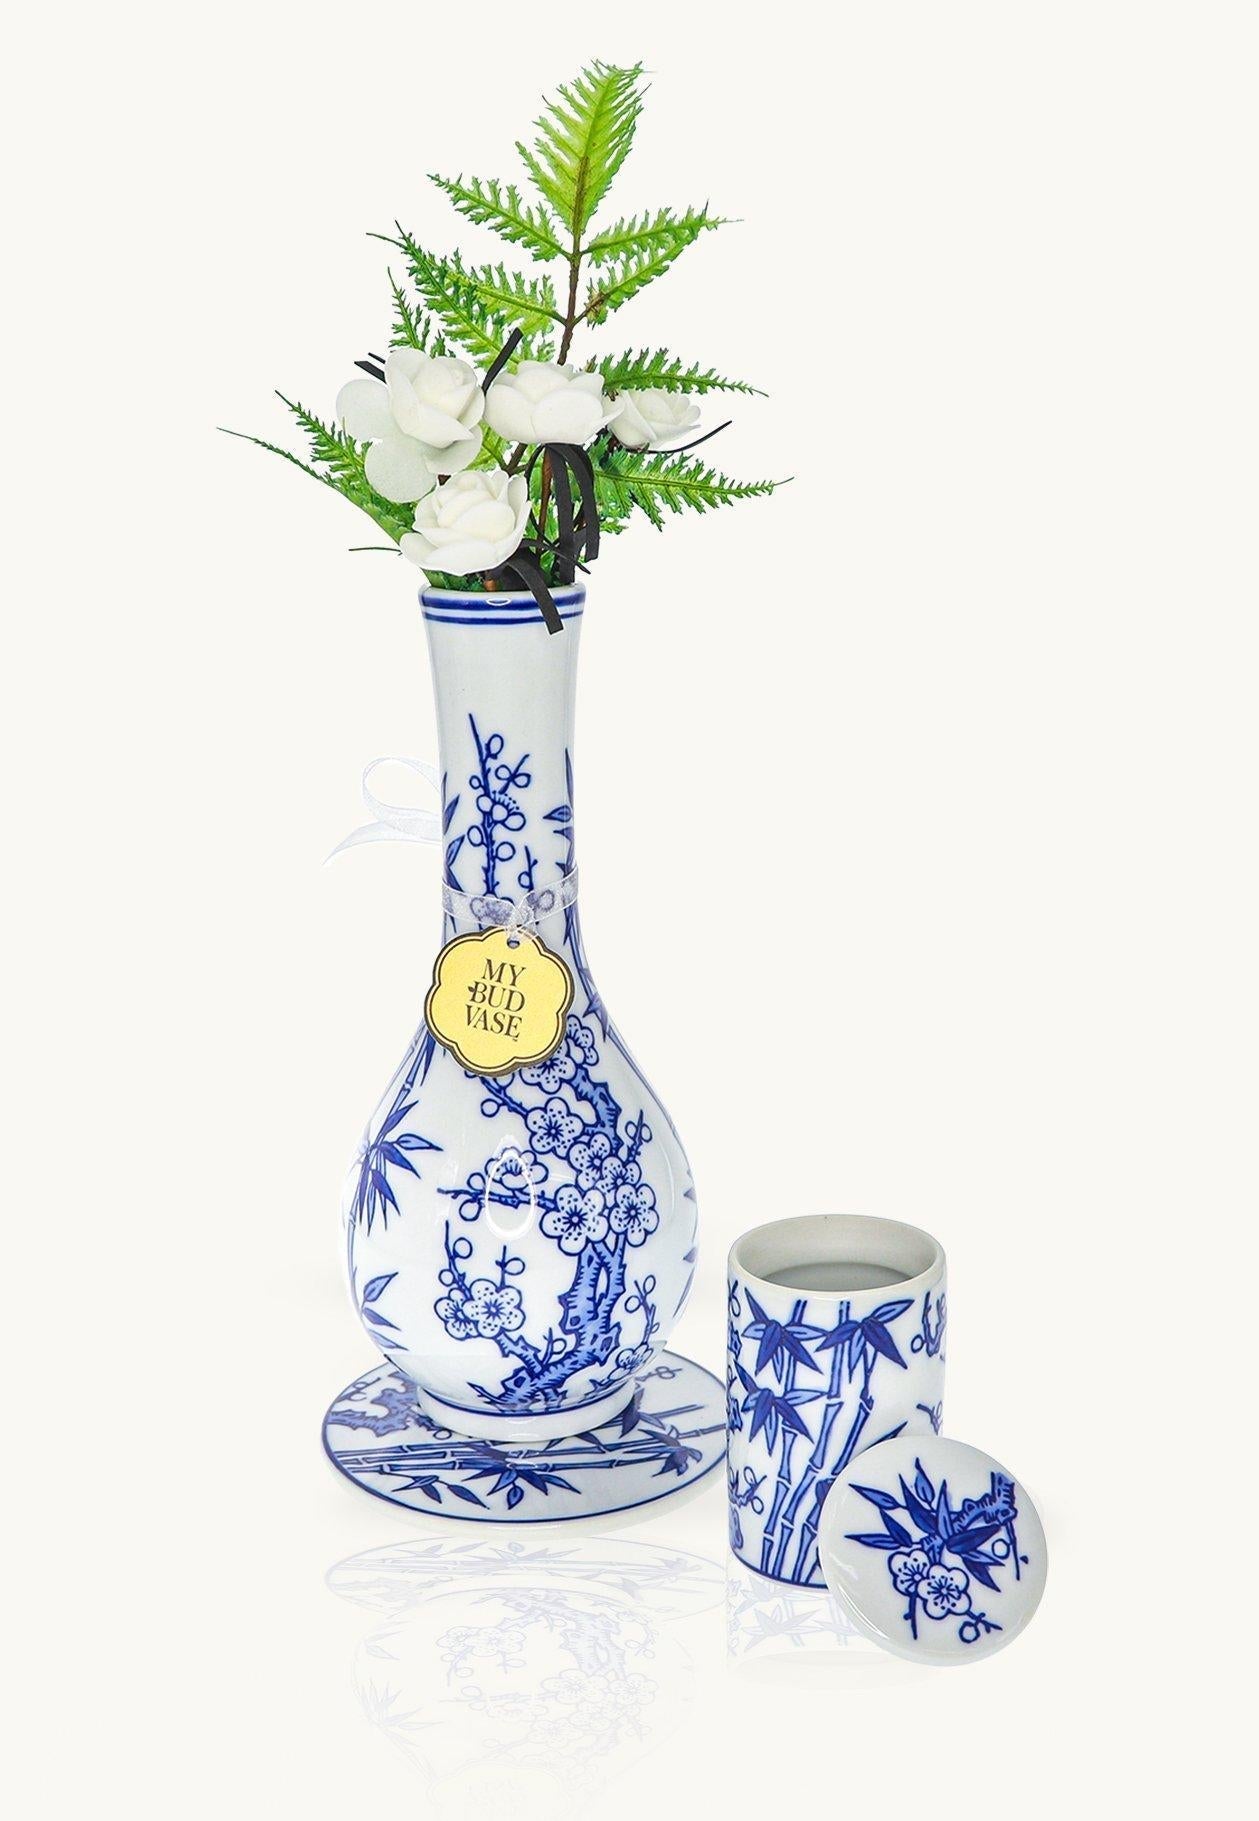 My Bud Vase Luck | Stogz | Find Your High